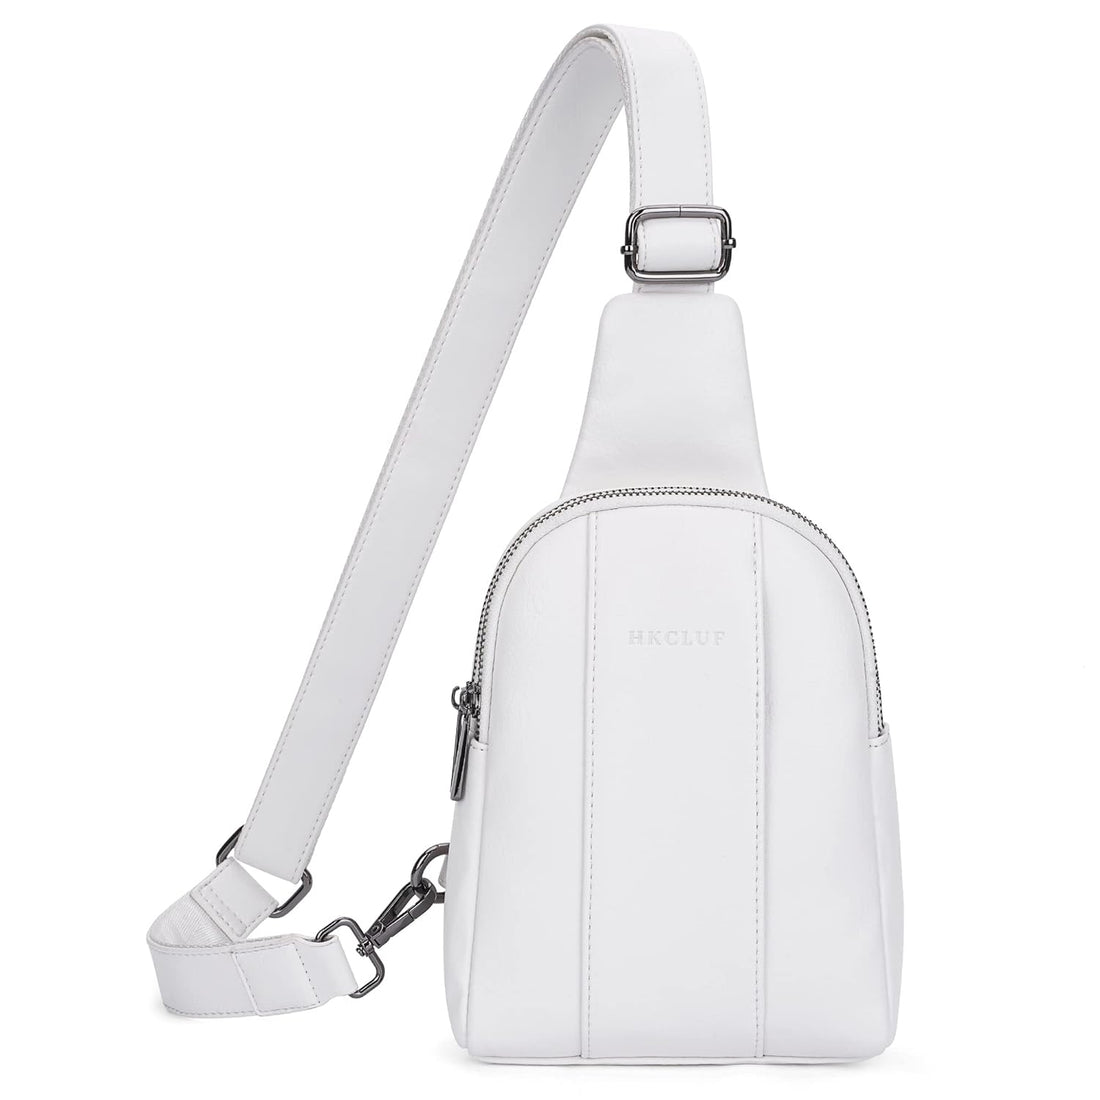 HKCLUF Sling Bag for Women Vegan Leather Chest Bag Small Crossboday Fanny Pack Cell Phone Sling Purse with Adjustable Strap, 03-white, Fashion